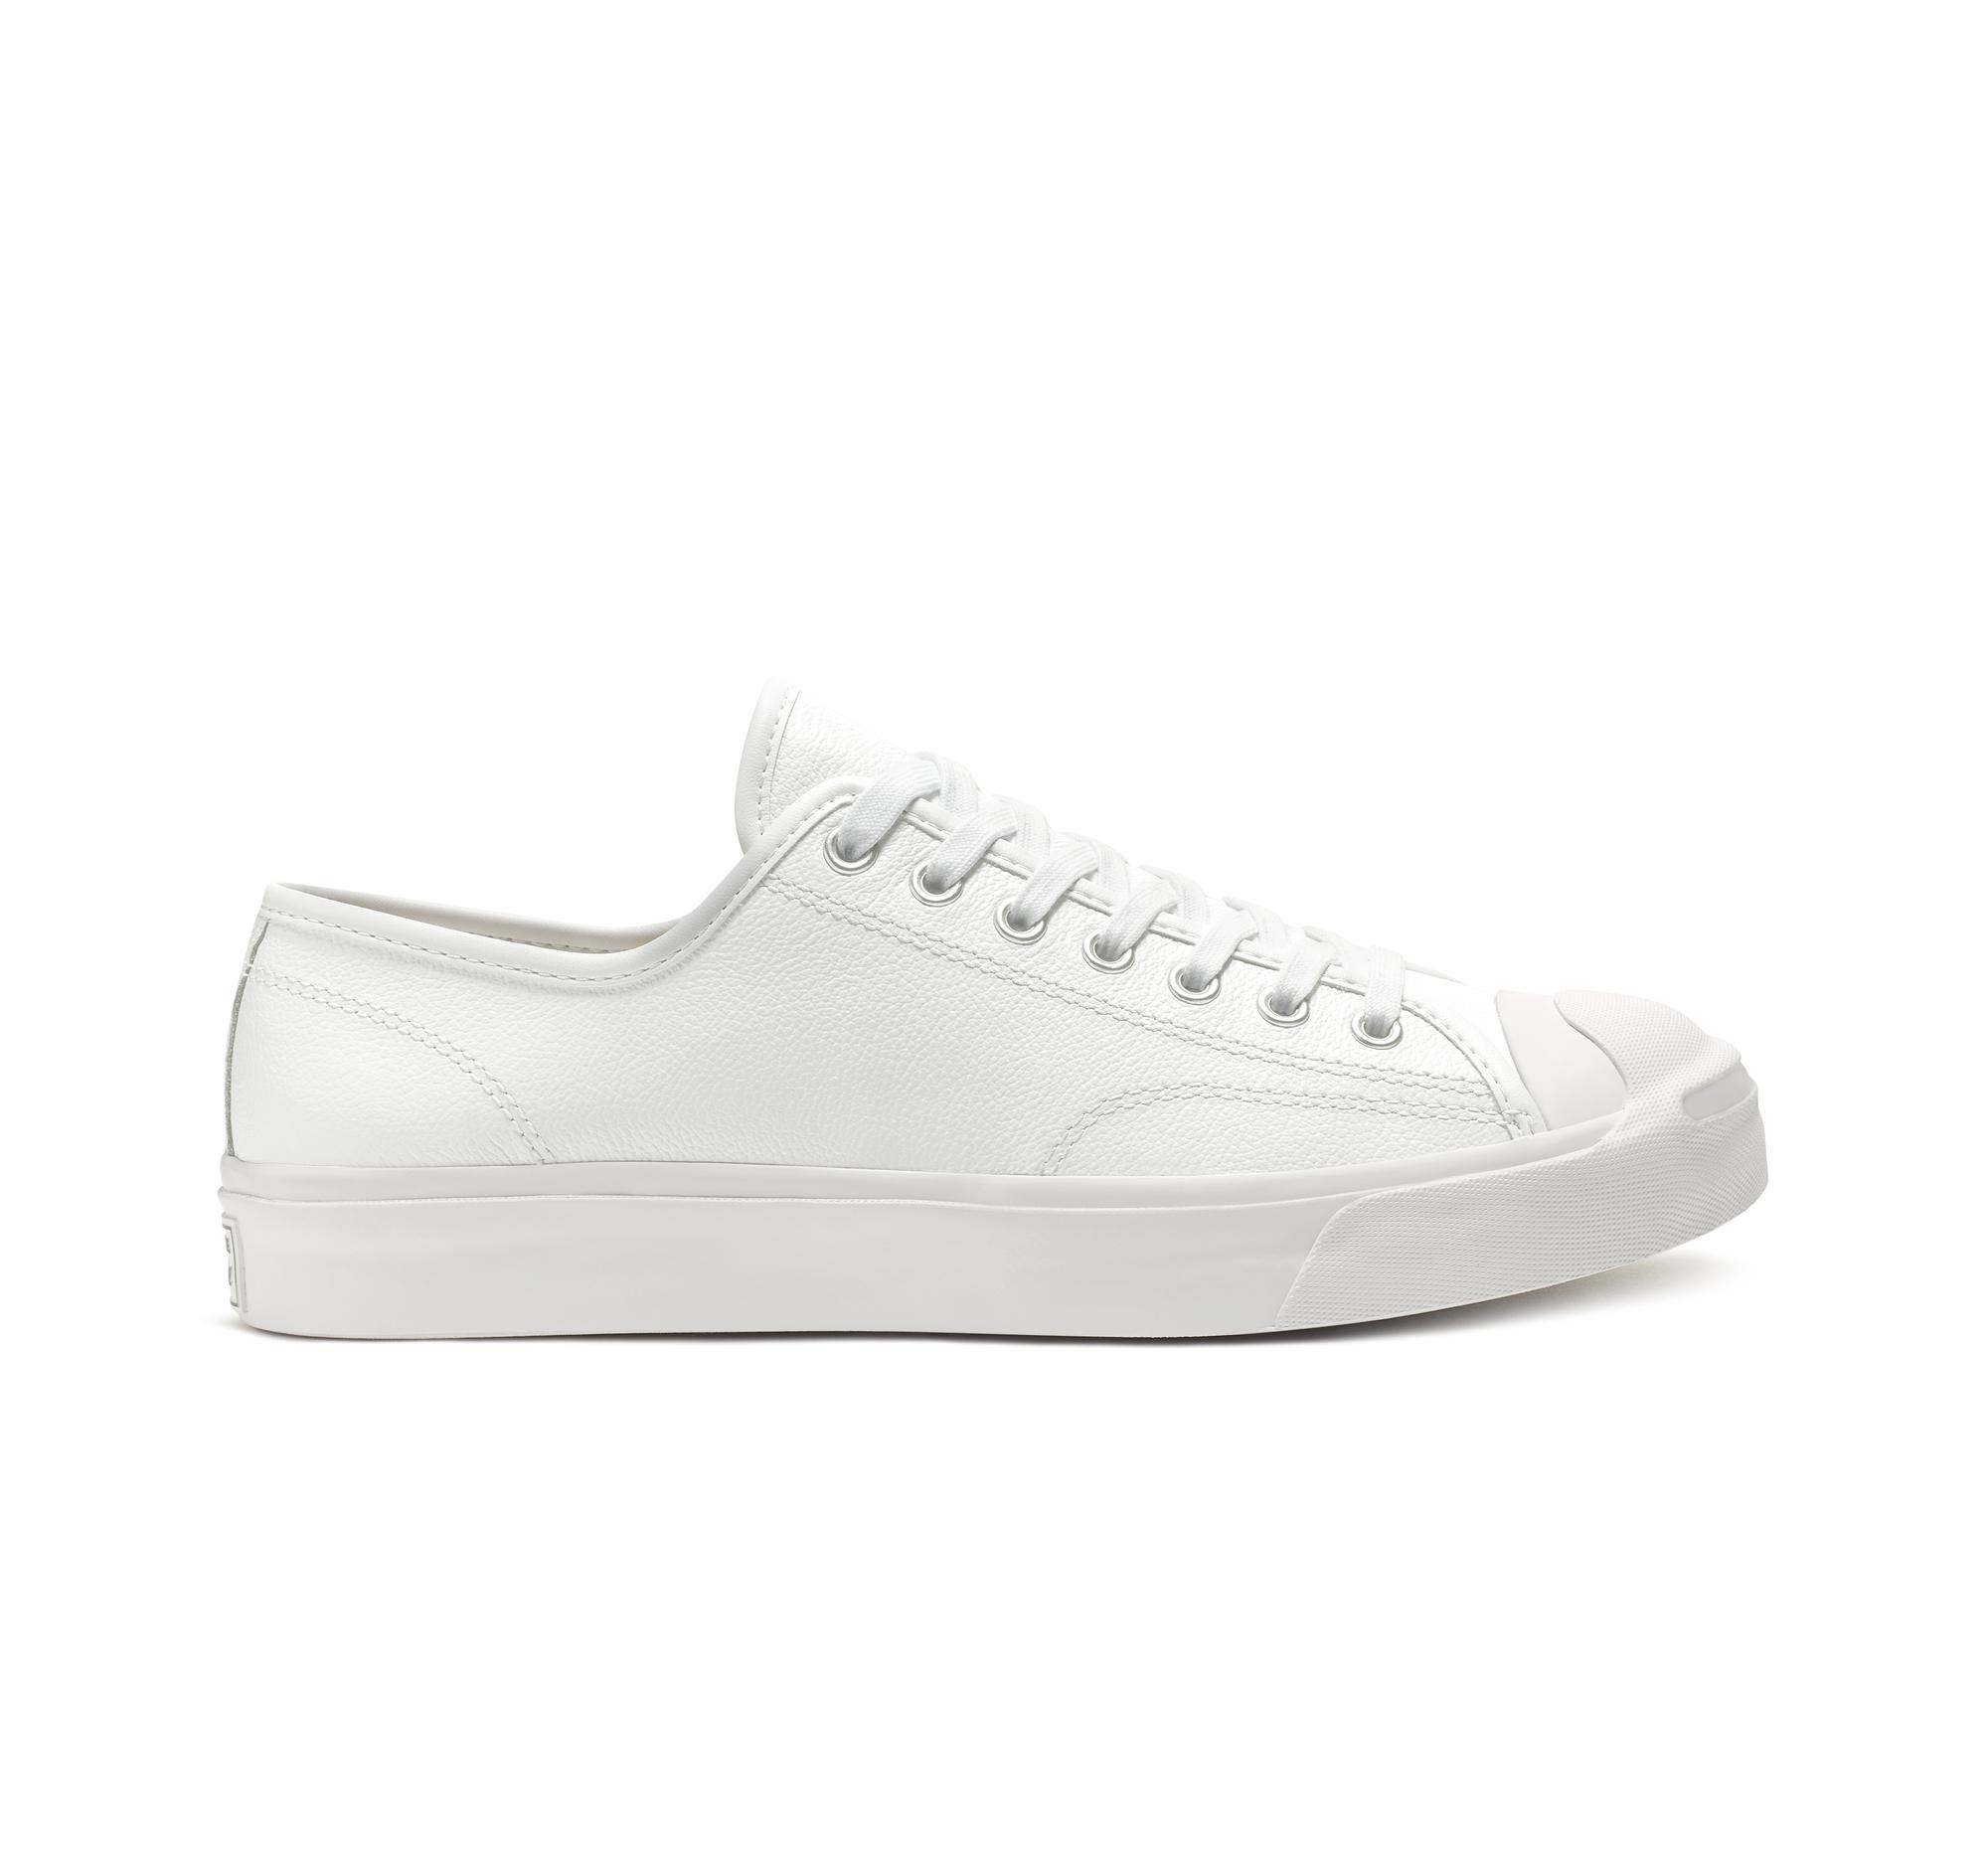 Converse Jack Purcell Leather in White - Lyst